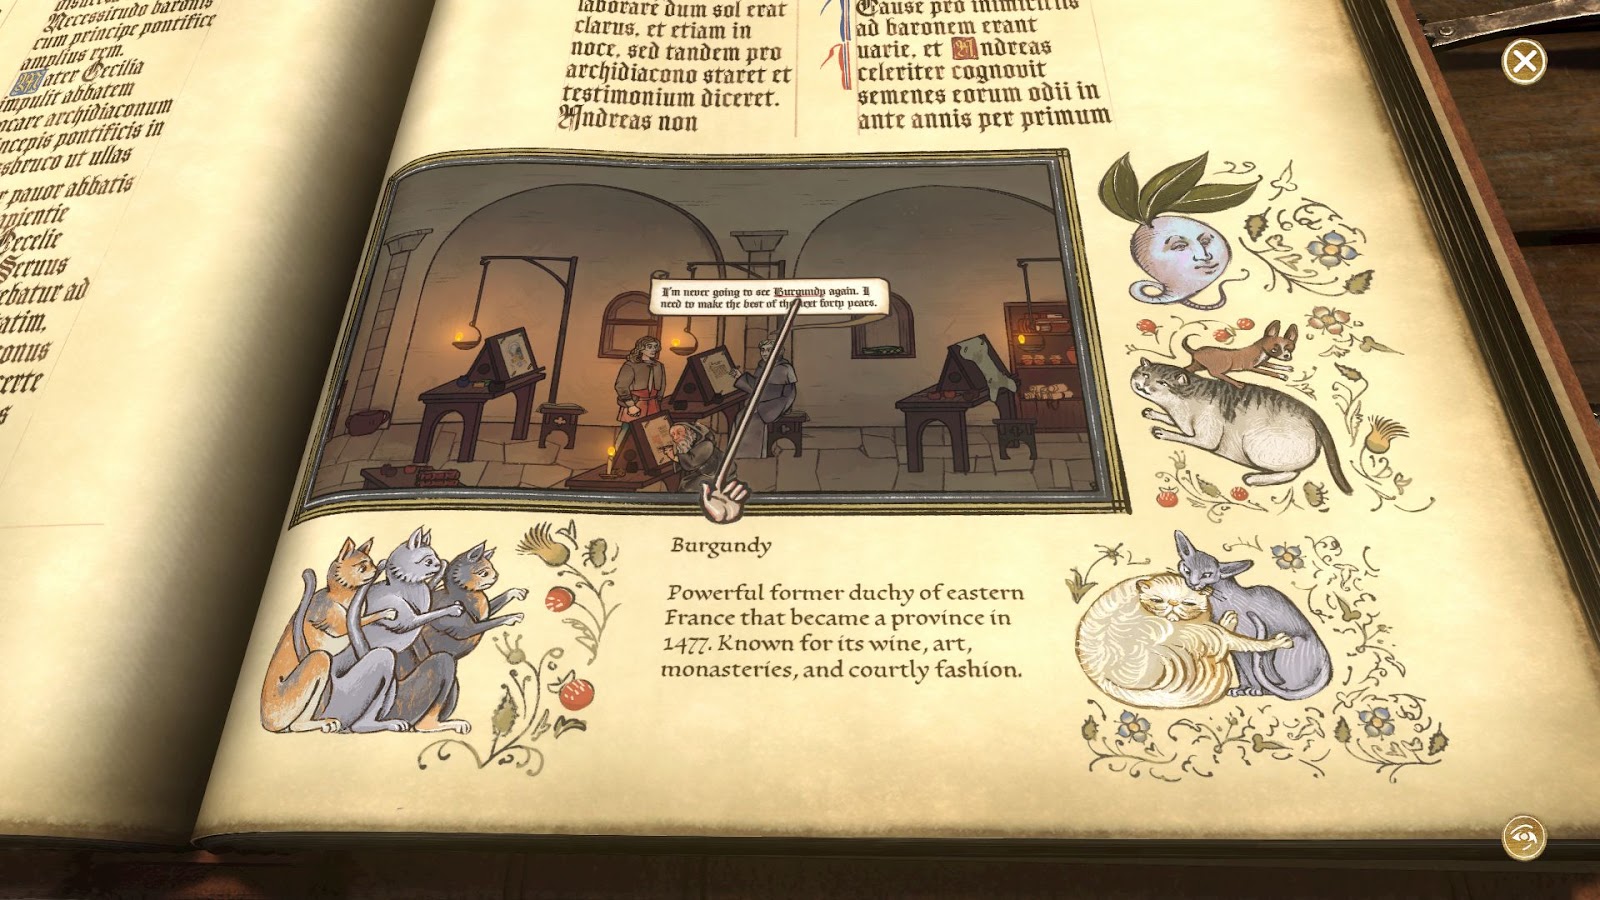 A screenshot of a moment in the game, showing the main action of the game as a smaller illumination within a large illuminated manuscript with decorated margins, and a long-fingered manicule pointing to a speech bubble. Information about Burgundy is recorded at the end of the manicule.